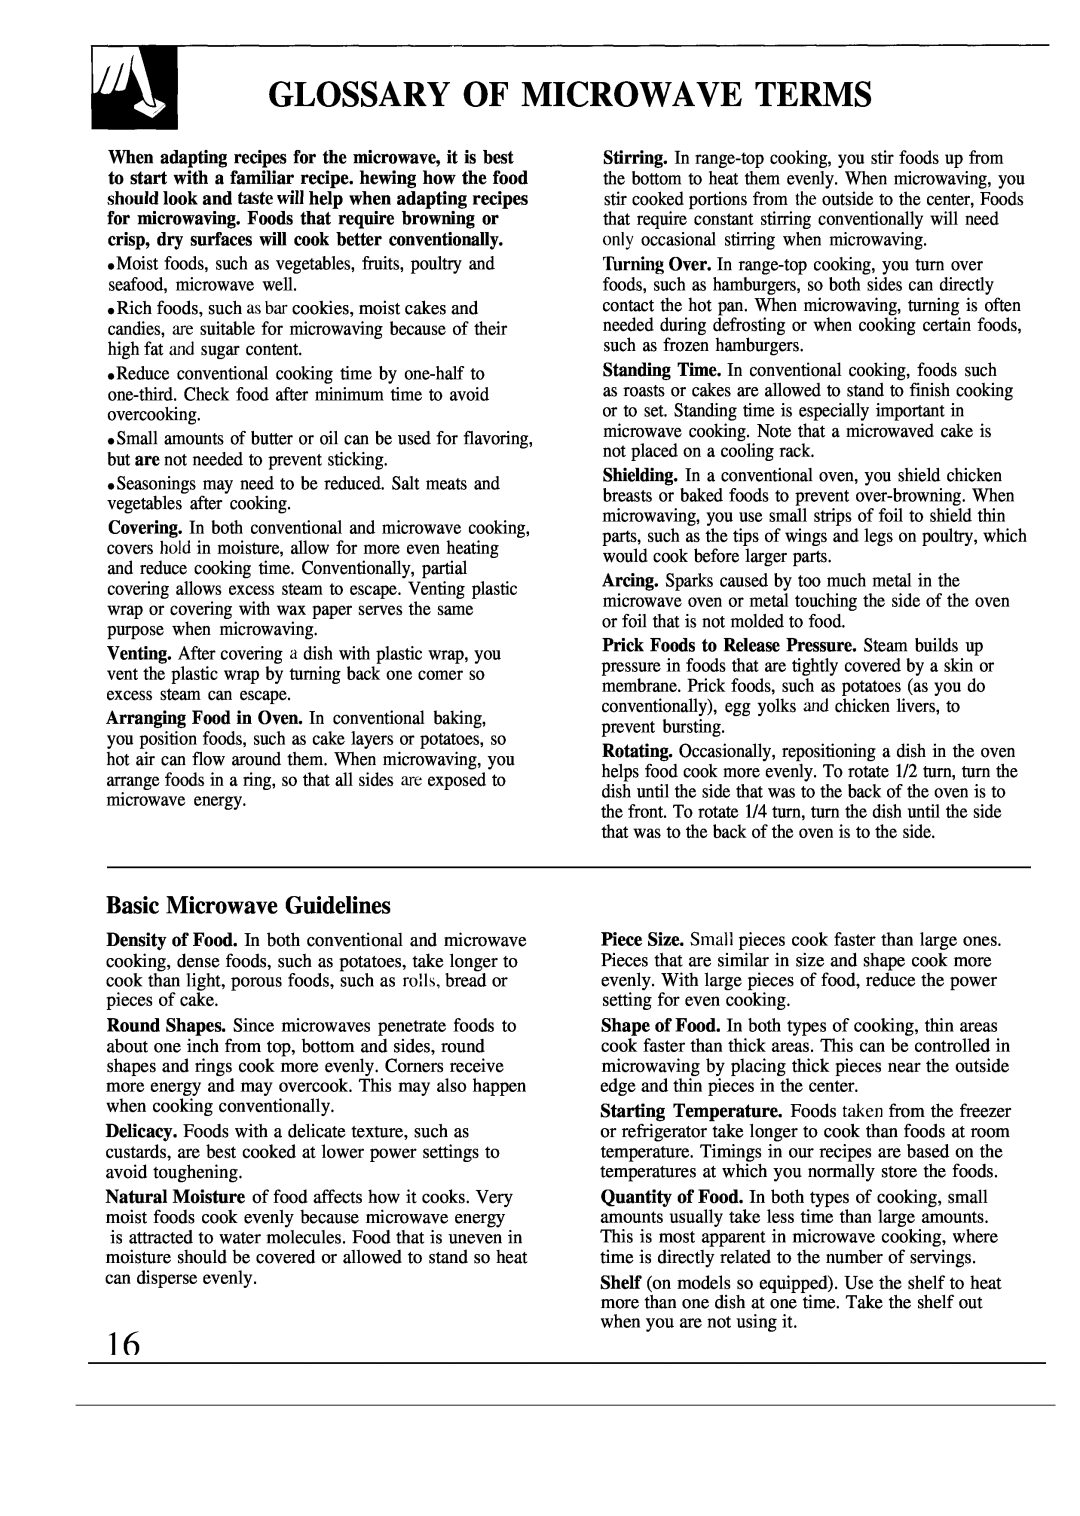 GE JVM132K, 49-8284, JVM133K, 164 D2588P088 warranty Glossary Of Microwave Terms, Basic Microwave Guidelines 